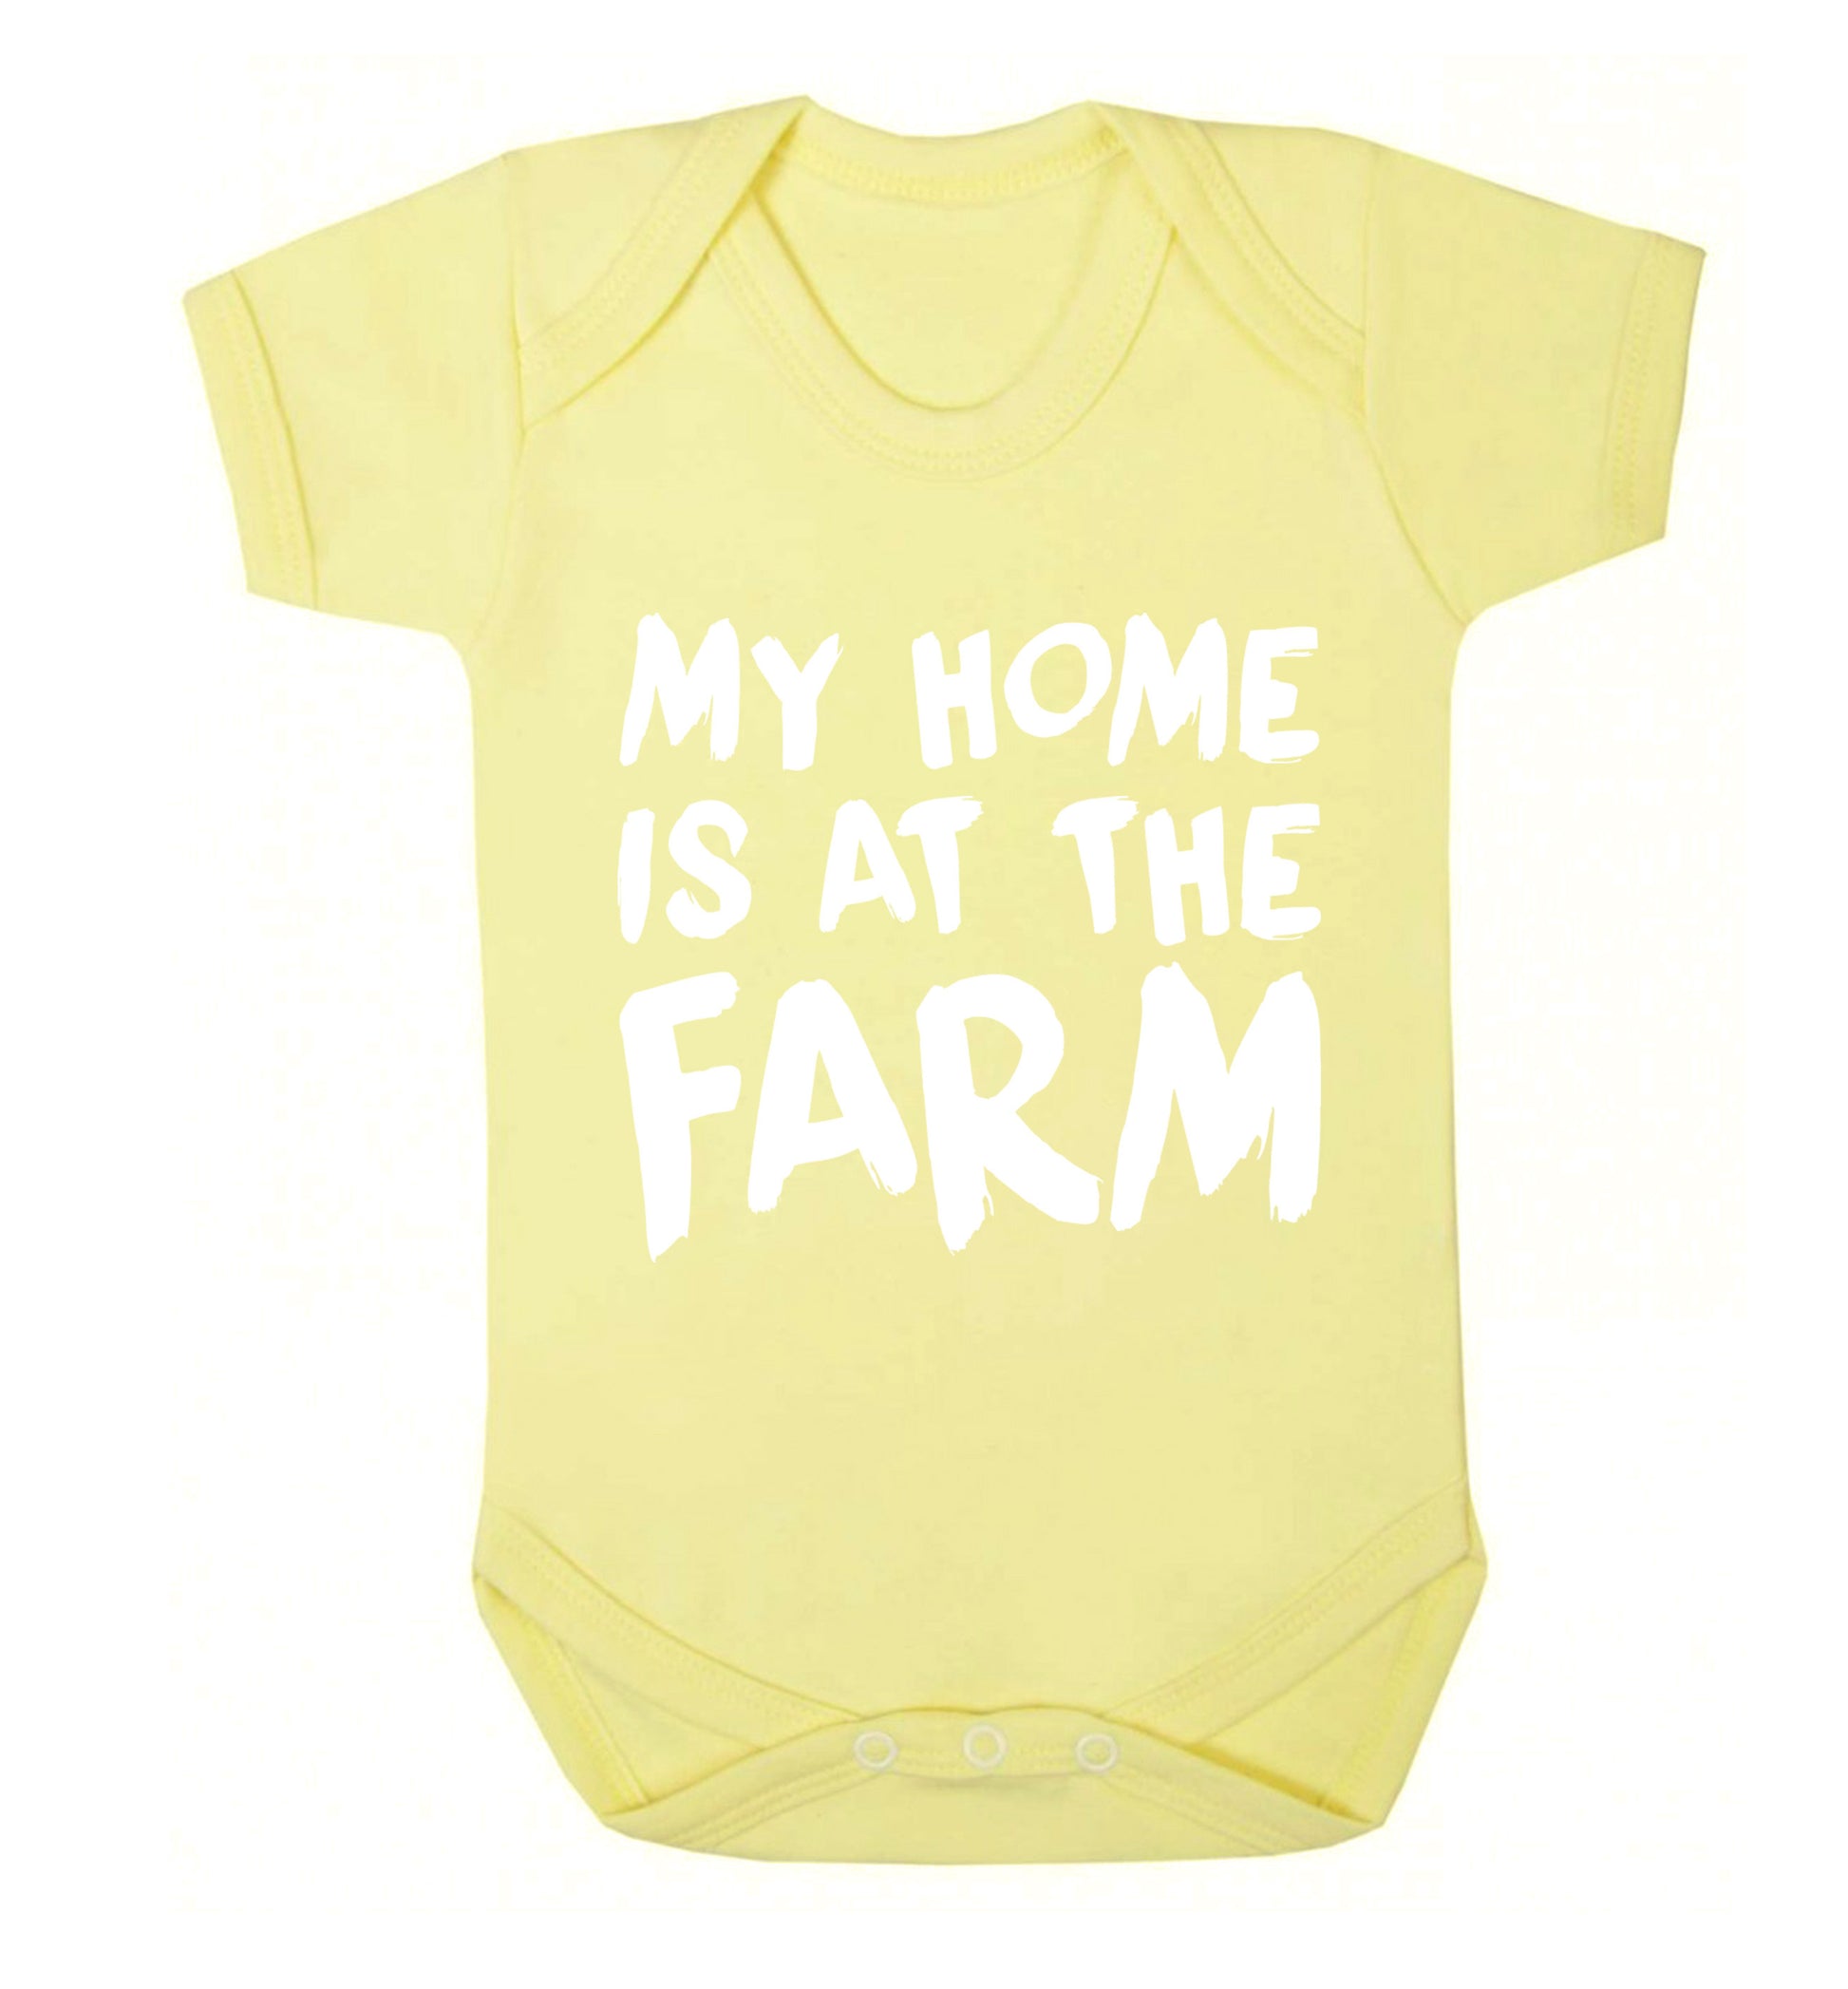 My home is at the farm Baby Vest pale yellow 18-24 months